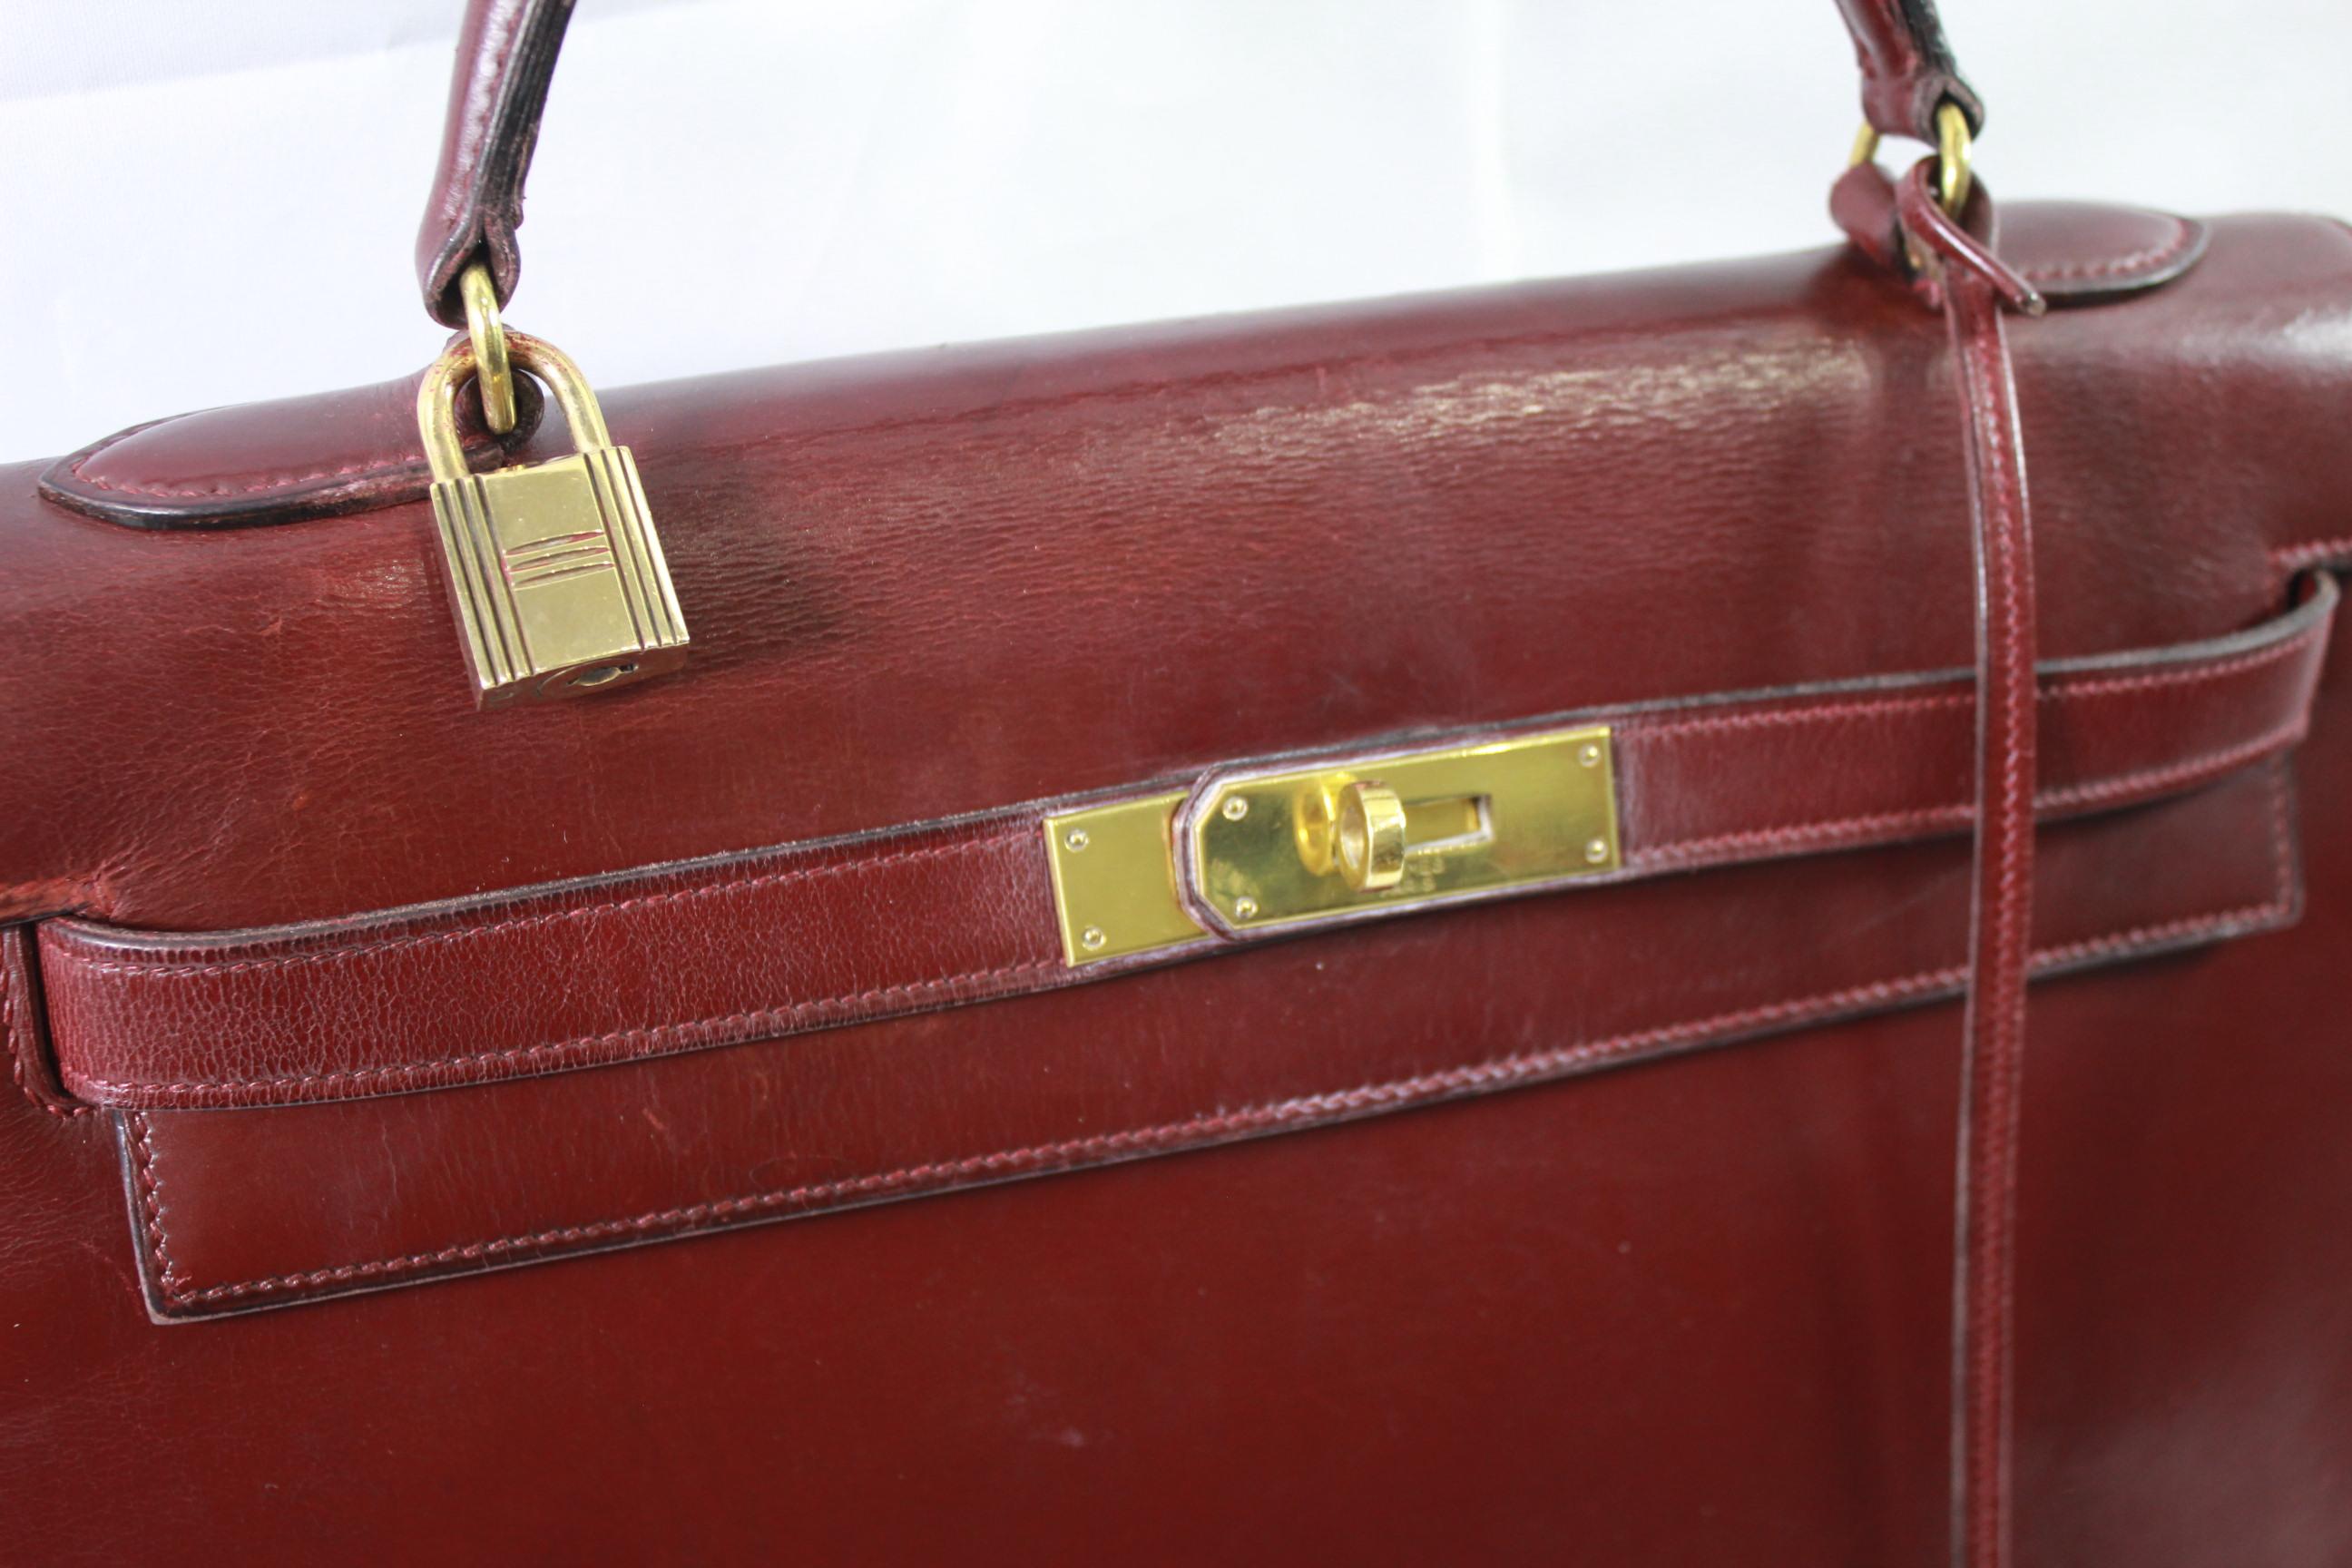 Nice Hermes vintage bag in burgundy box leather.
Size 32
Good vintage condition however it presents some signs of use.
Corners in good condition
Soold with key and lock 
